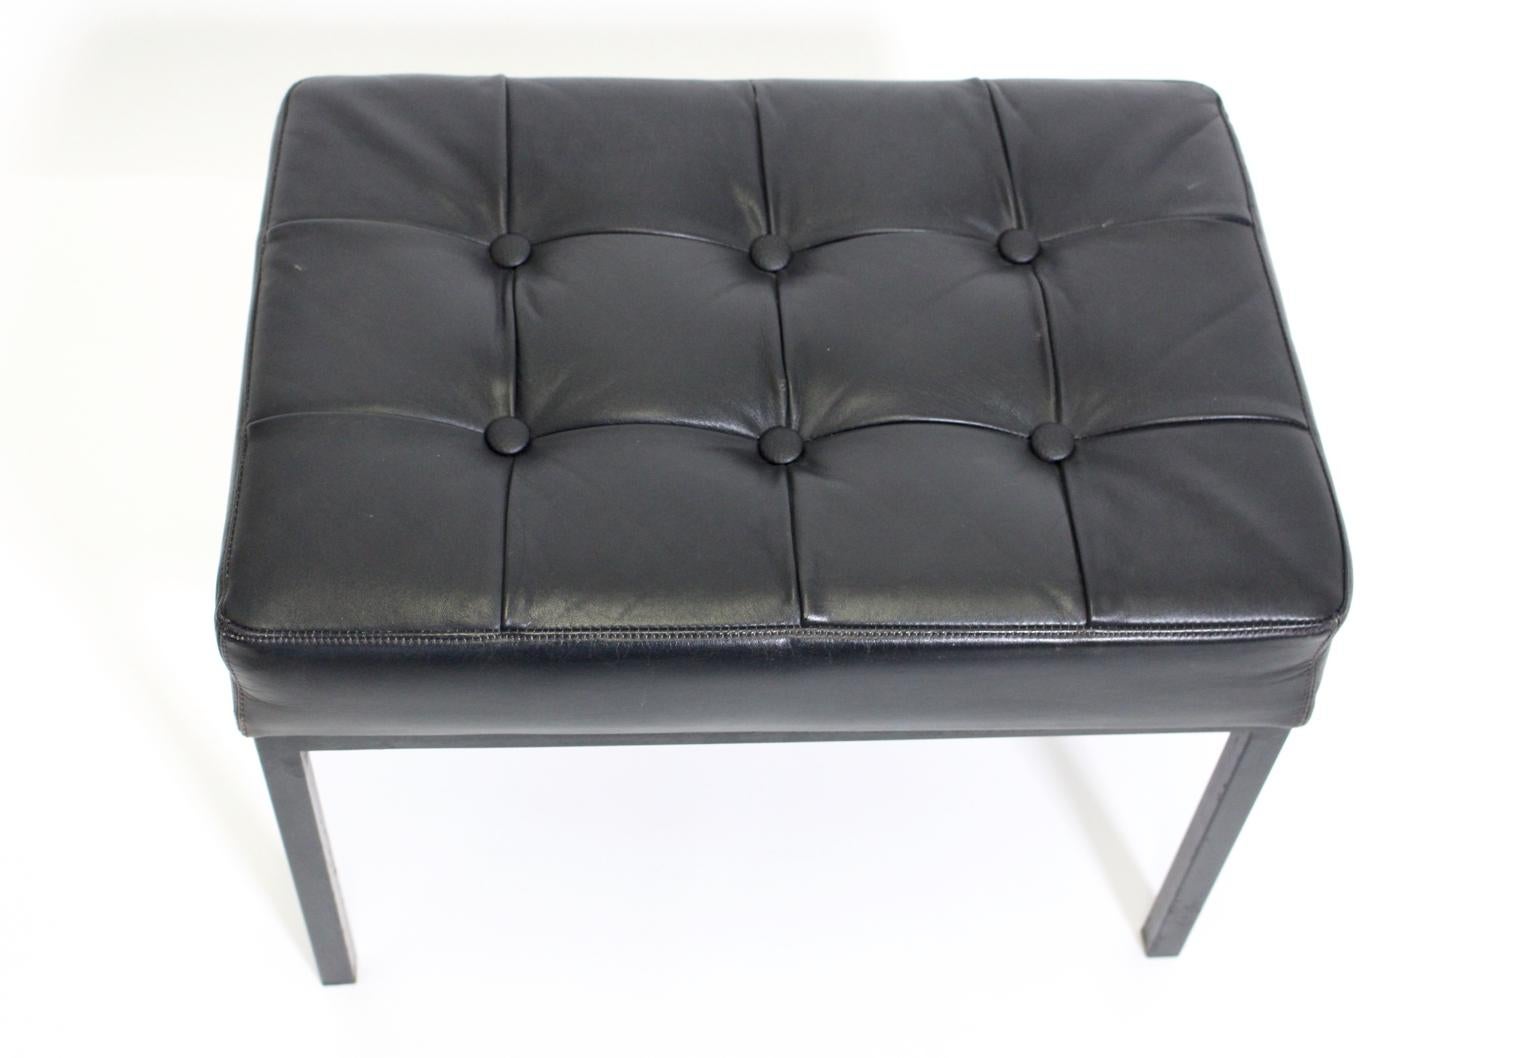 This vintage stool from the 1970s shows a black stitched leather covering. Also the stool is decorated with leather buttons.
The base and the feet were made of black lacquered metal. 
The vintage condition is very good and shows signs of age and